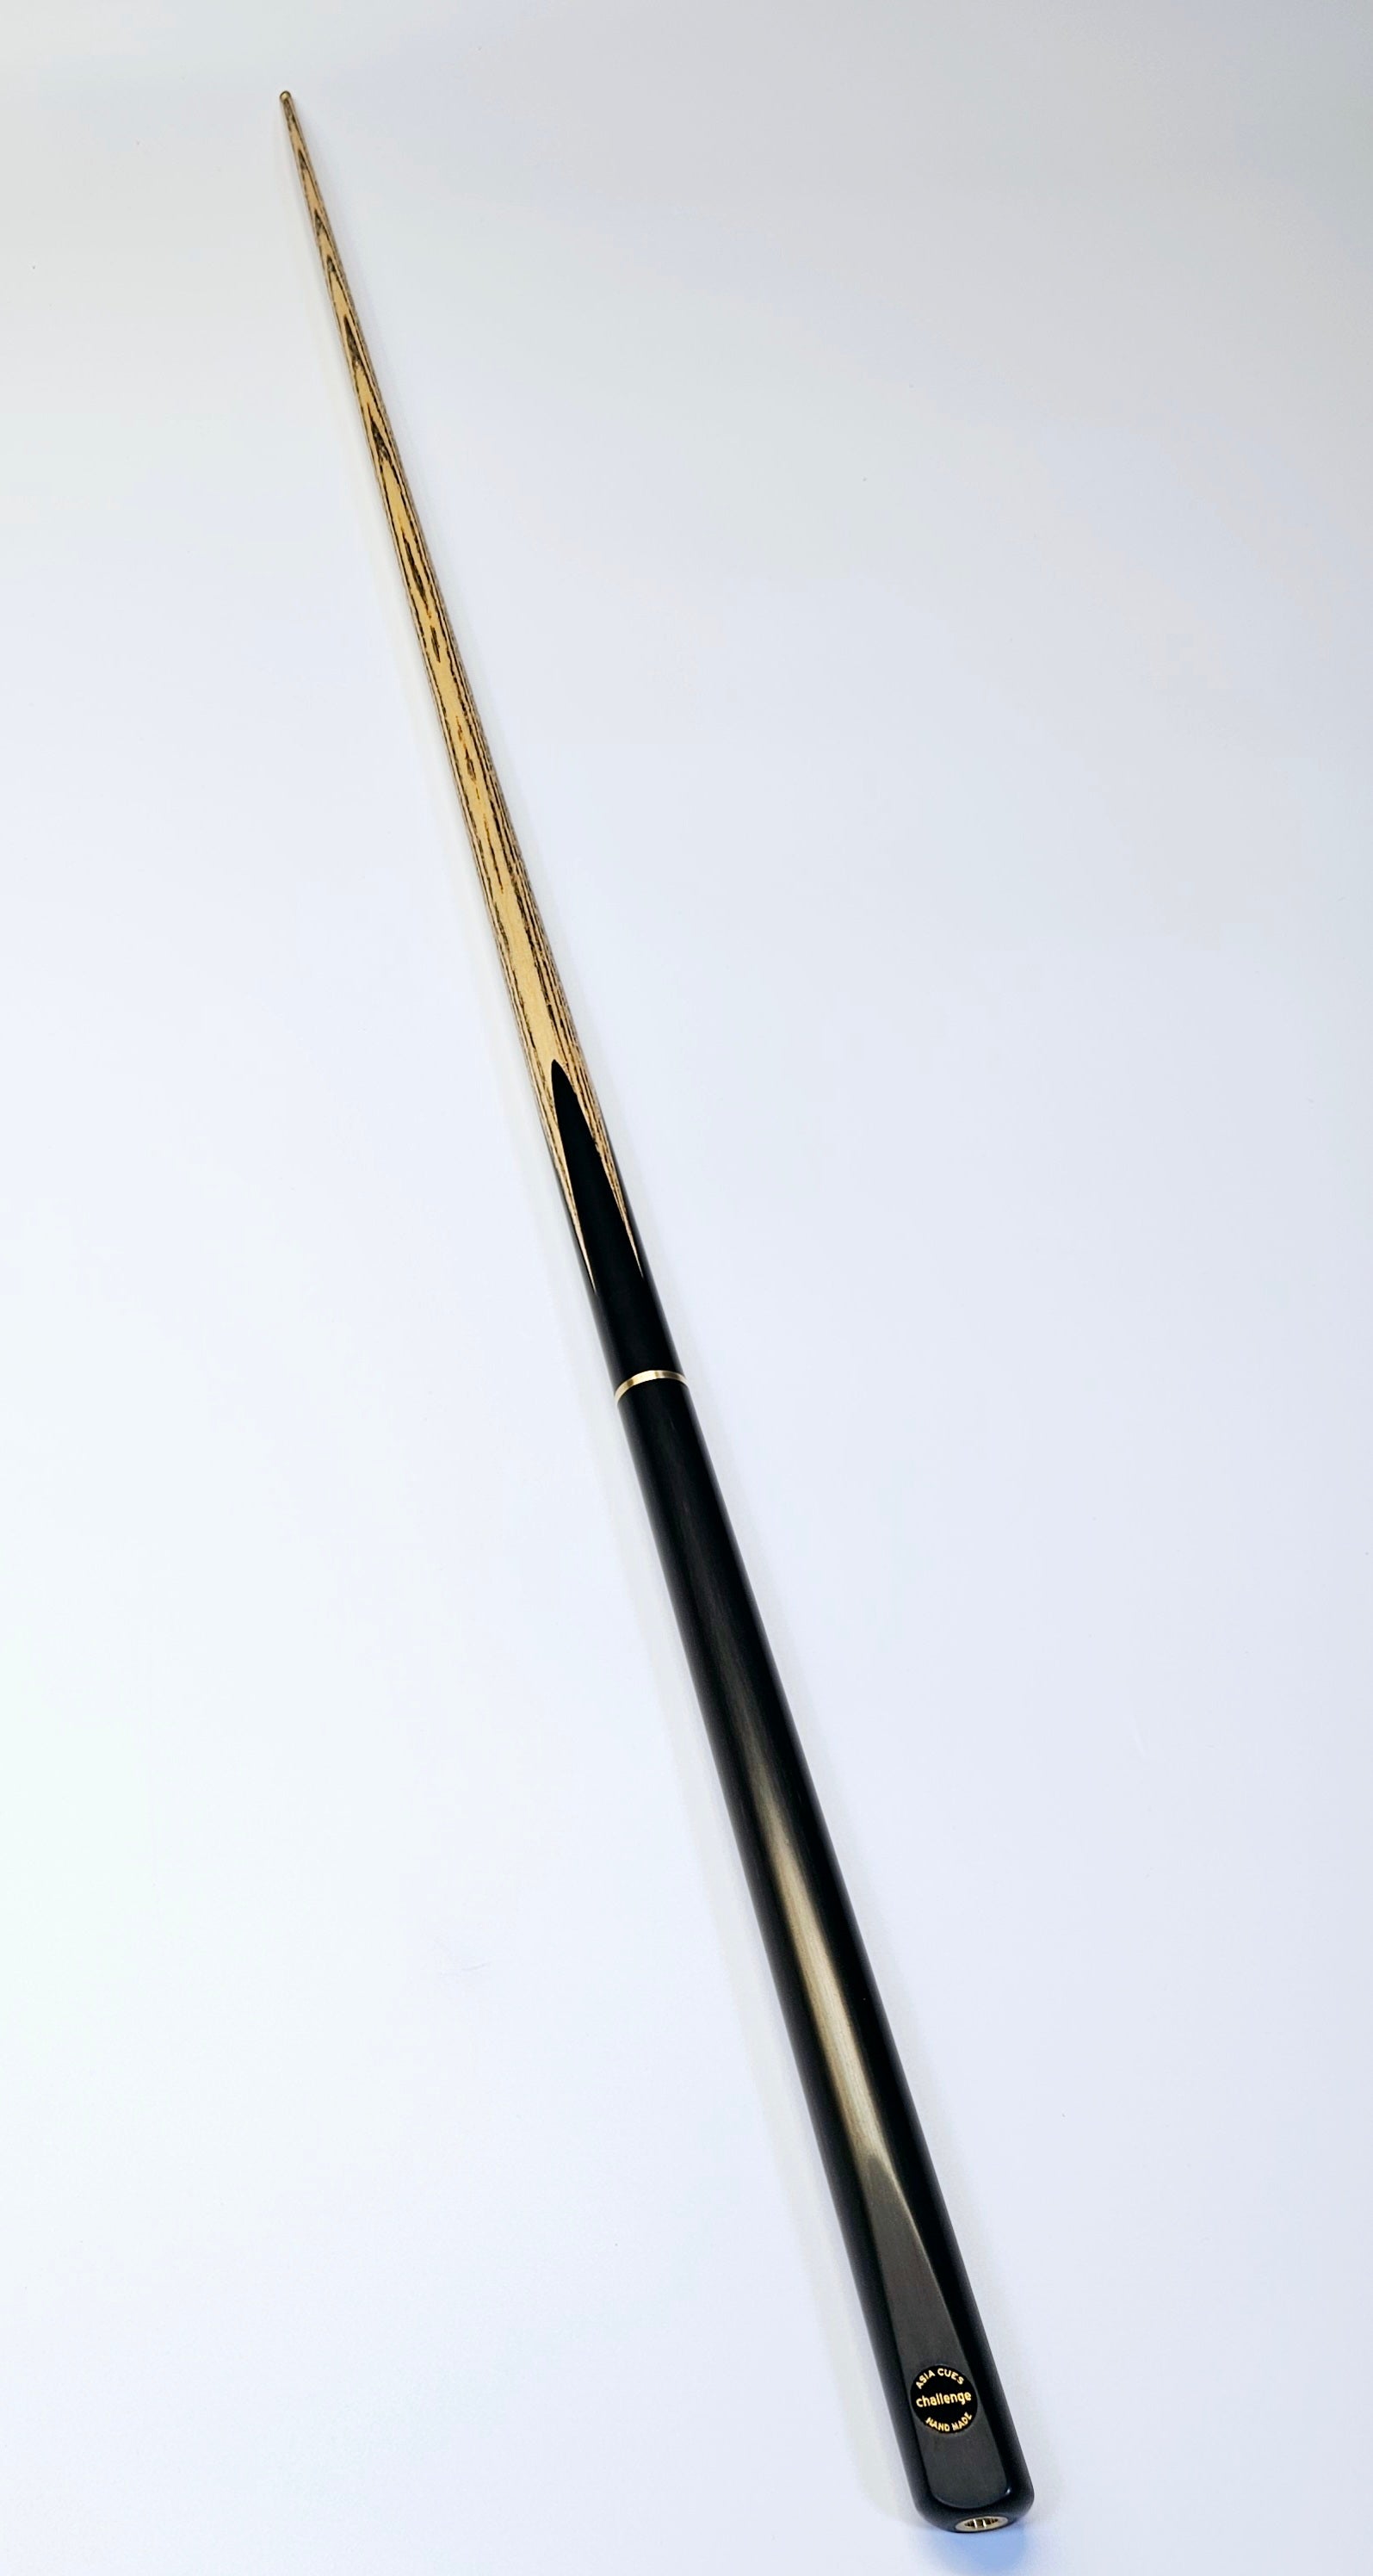 Asia Cues Challenge - 3/4 Jointed Pool Cue 8.6mm Tip, 18.3oz, 58.25"